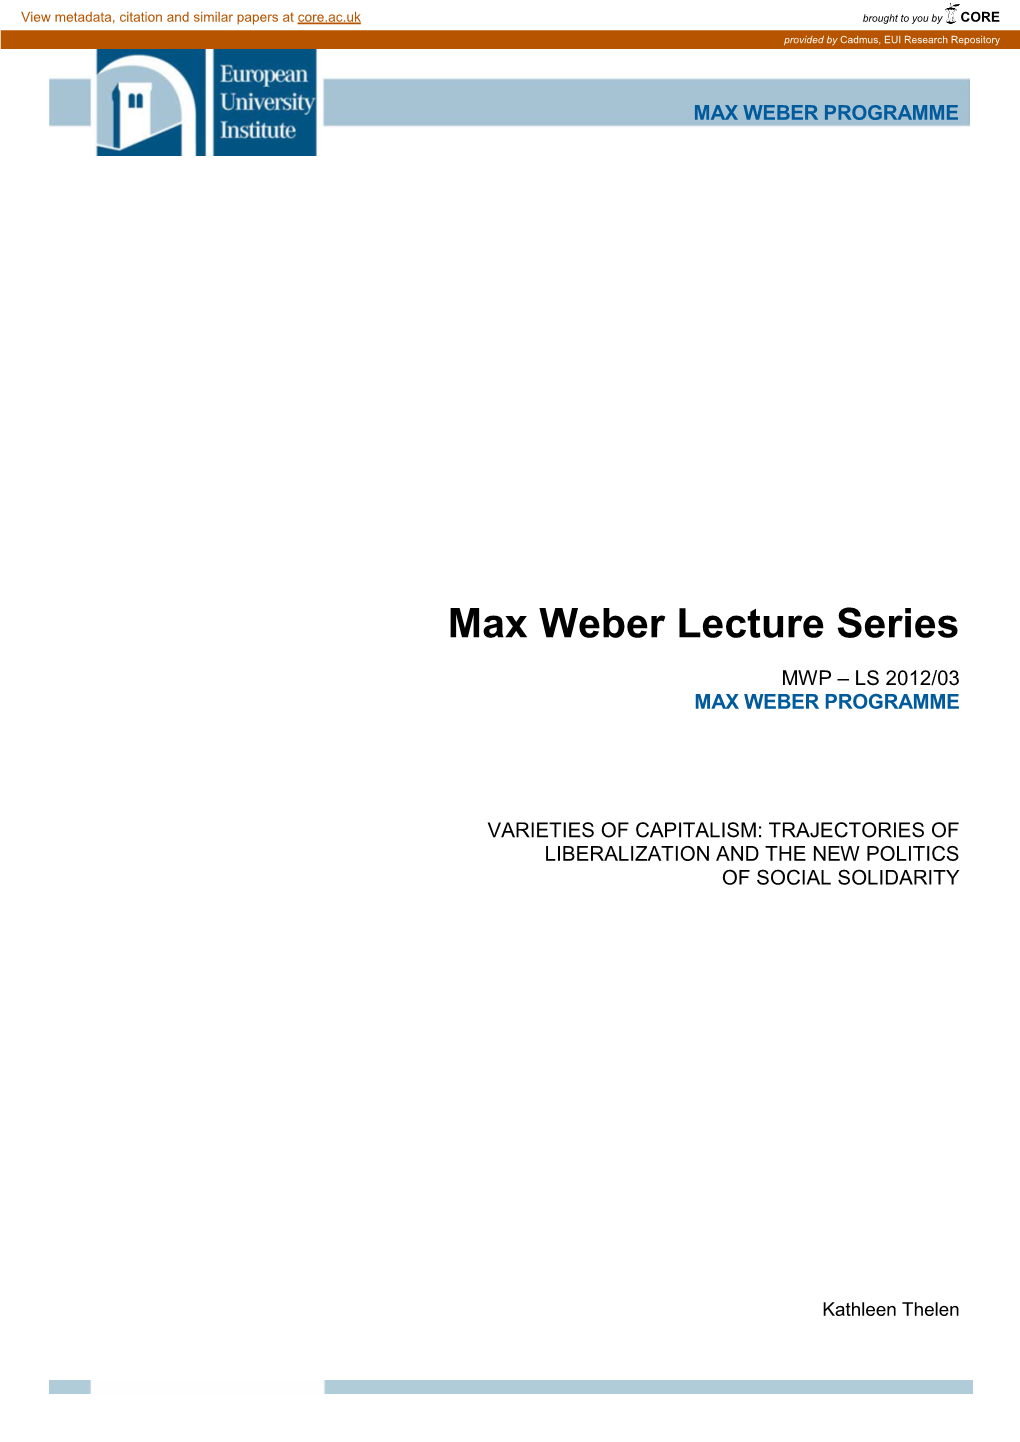 Max Weber Lecture Series